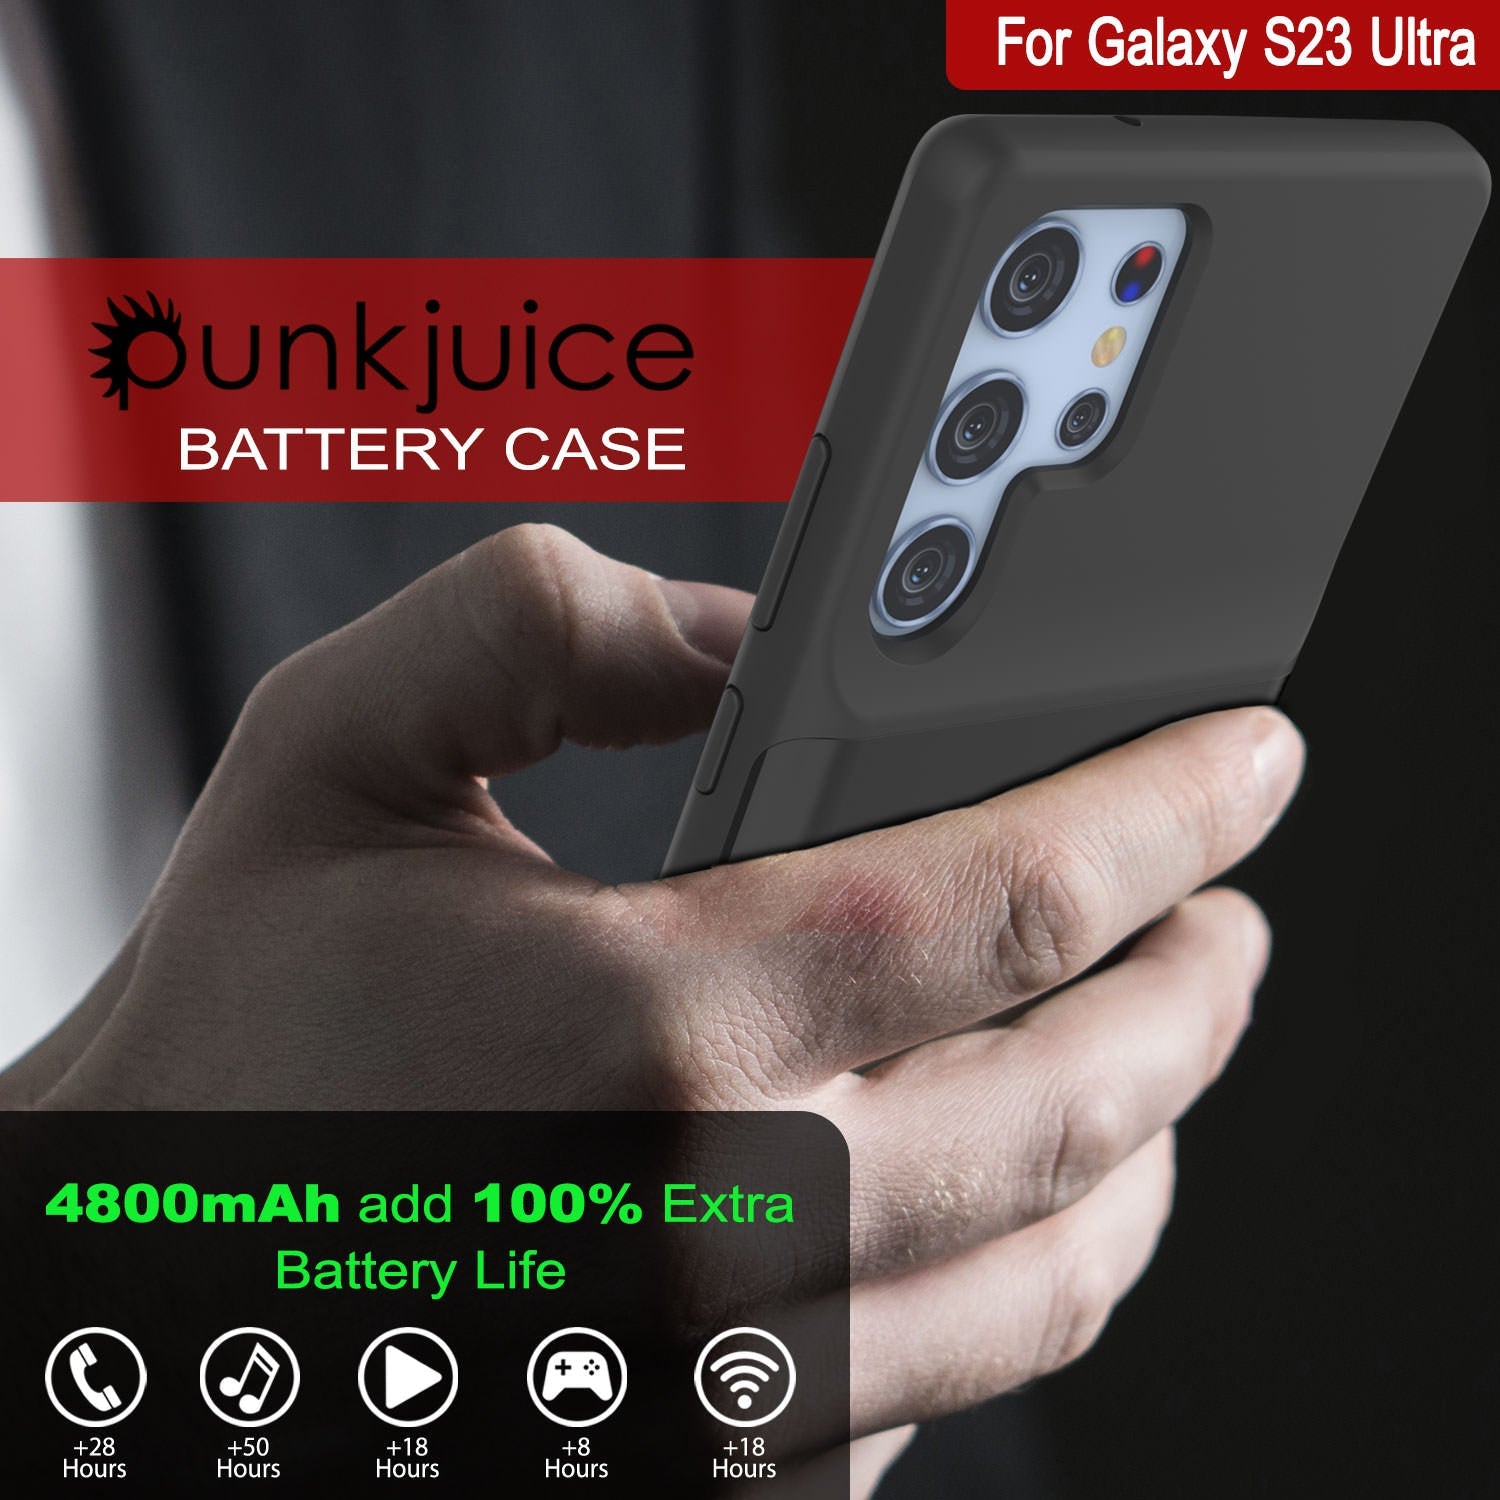 PunkJuice S24 Battery Case Black - Portable Charging Power Juice Bank with 4500mAh